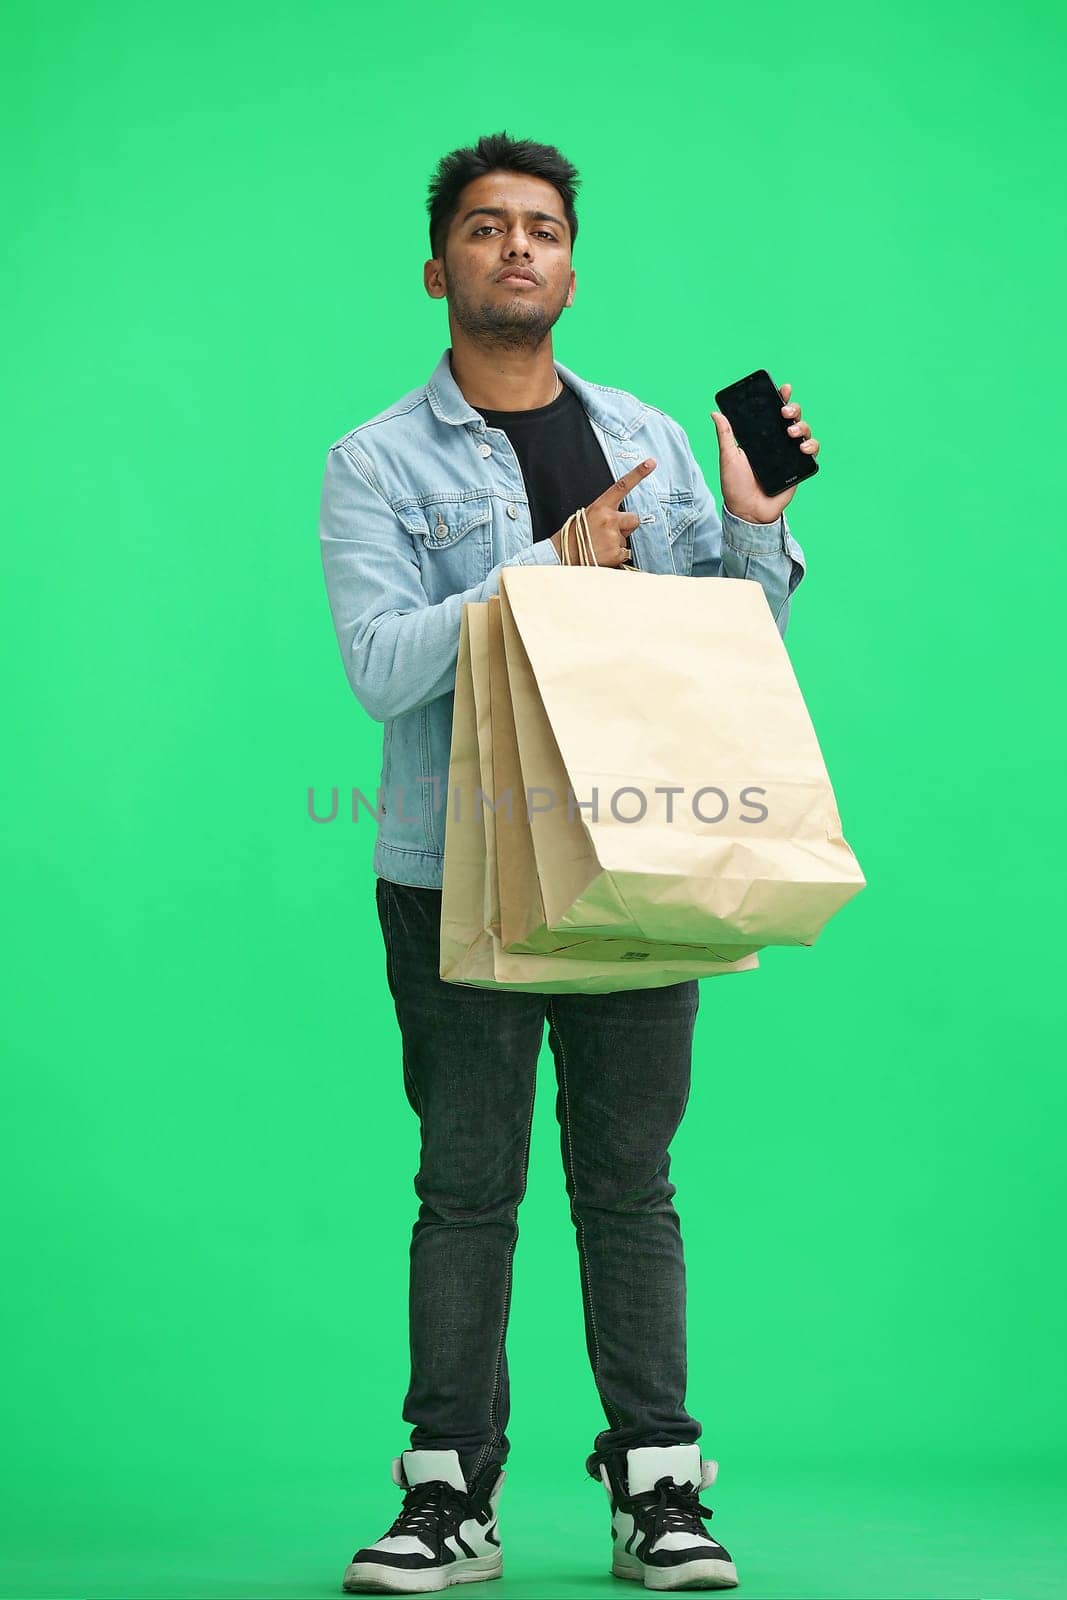 Man on a green background with shoppers show phone.